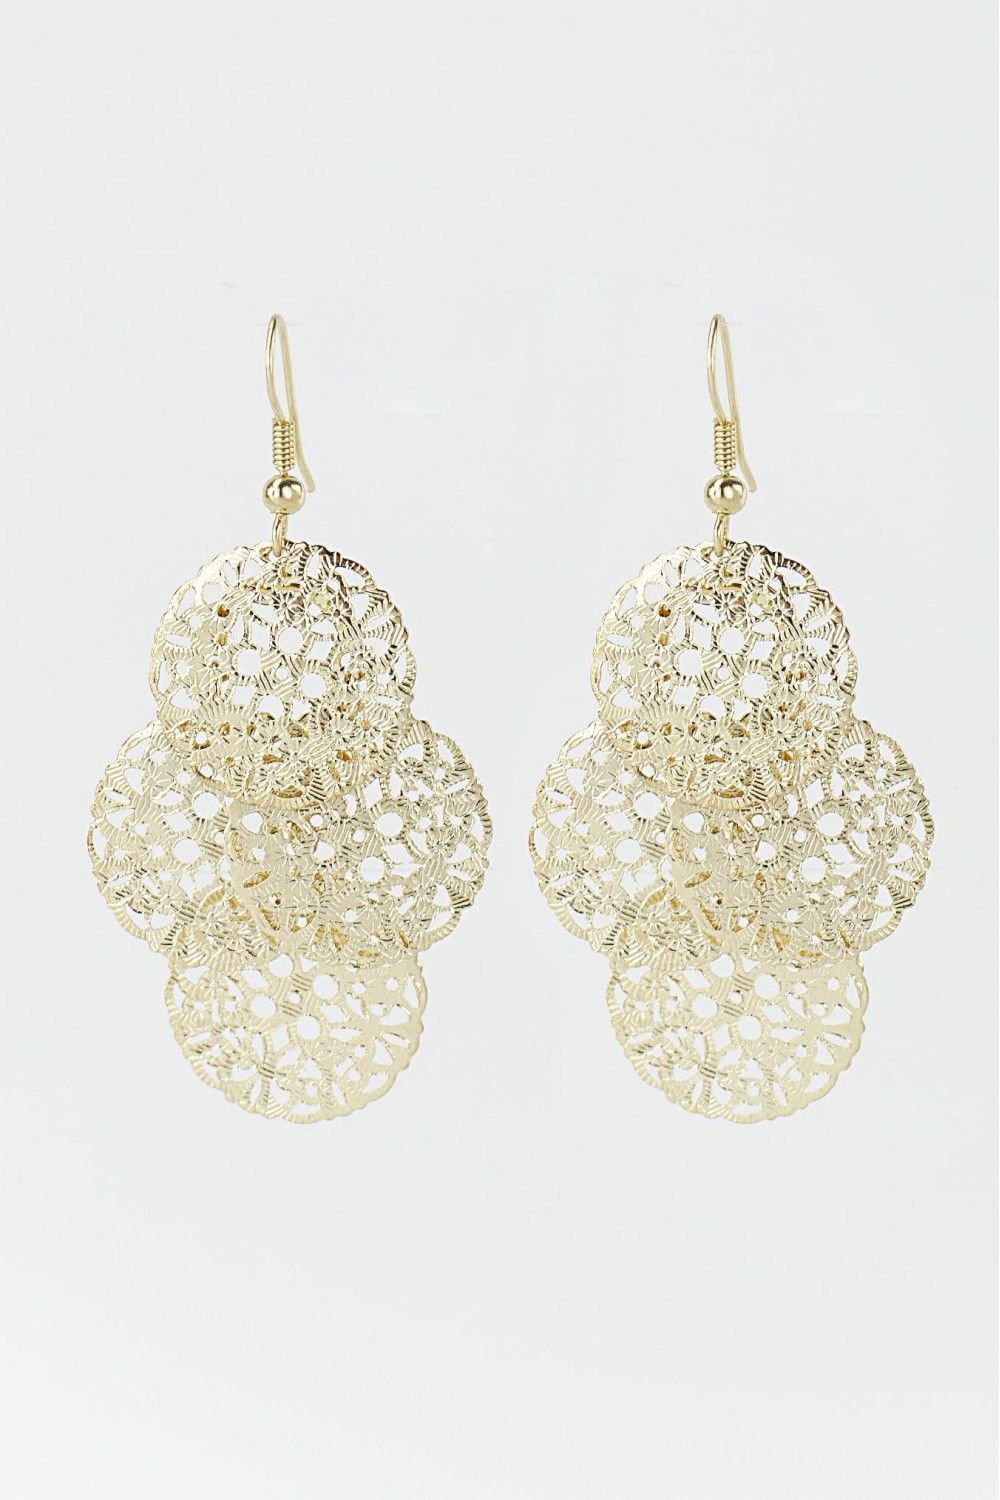 Dressing Your Truth – Type 1 Morning Song Earrings     Rise and shine with these classic Type 1 earrings! Light weight gold